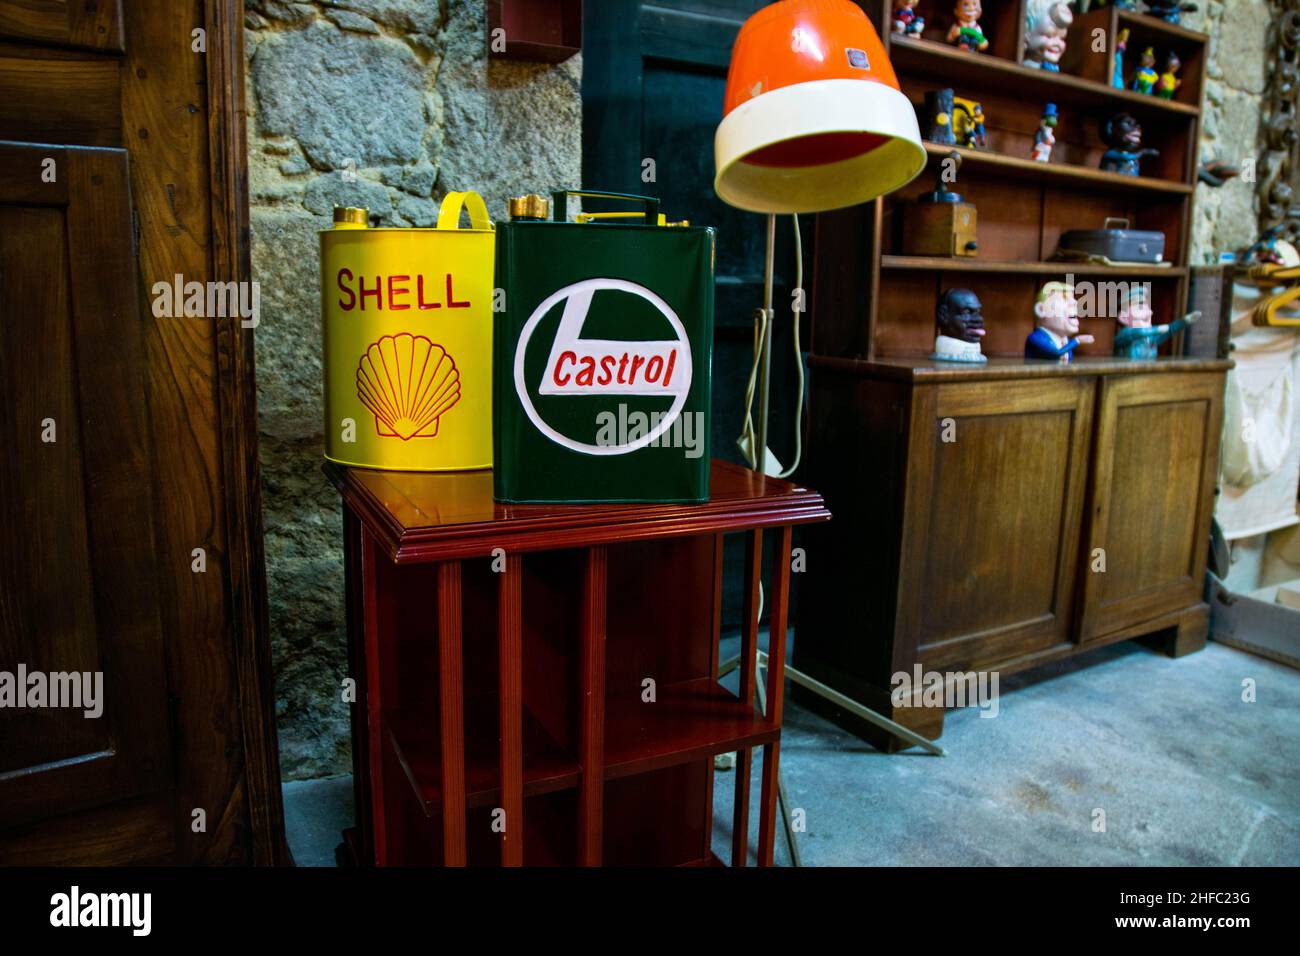 Porto, Portugal - 18 Nov 2020: Old vintage Shell and Castrol petroleum oil canisters on a wooden table in a home. Retro old school home décor. Retro l Stock Photo